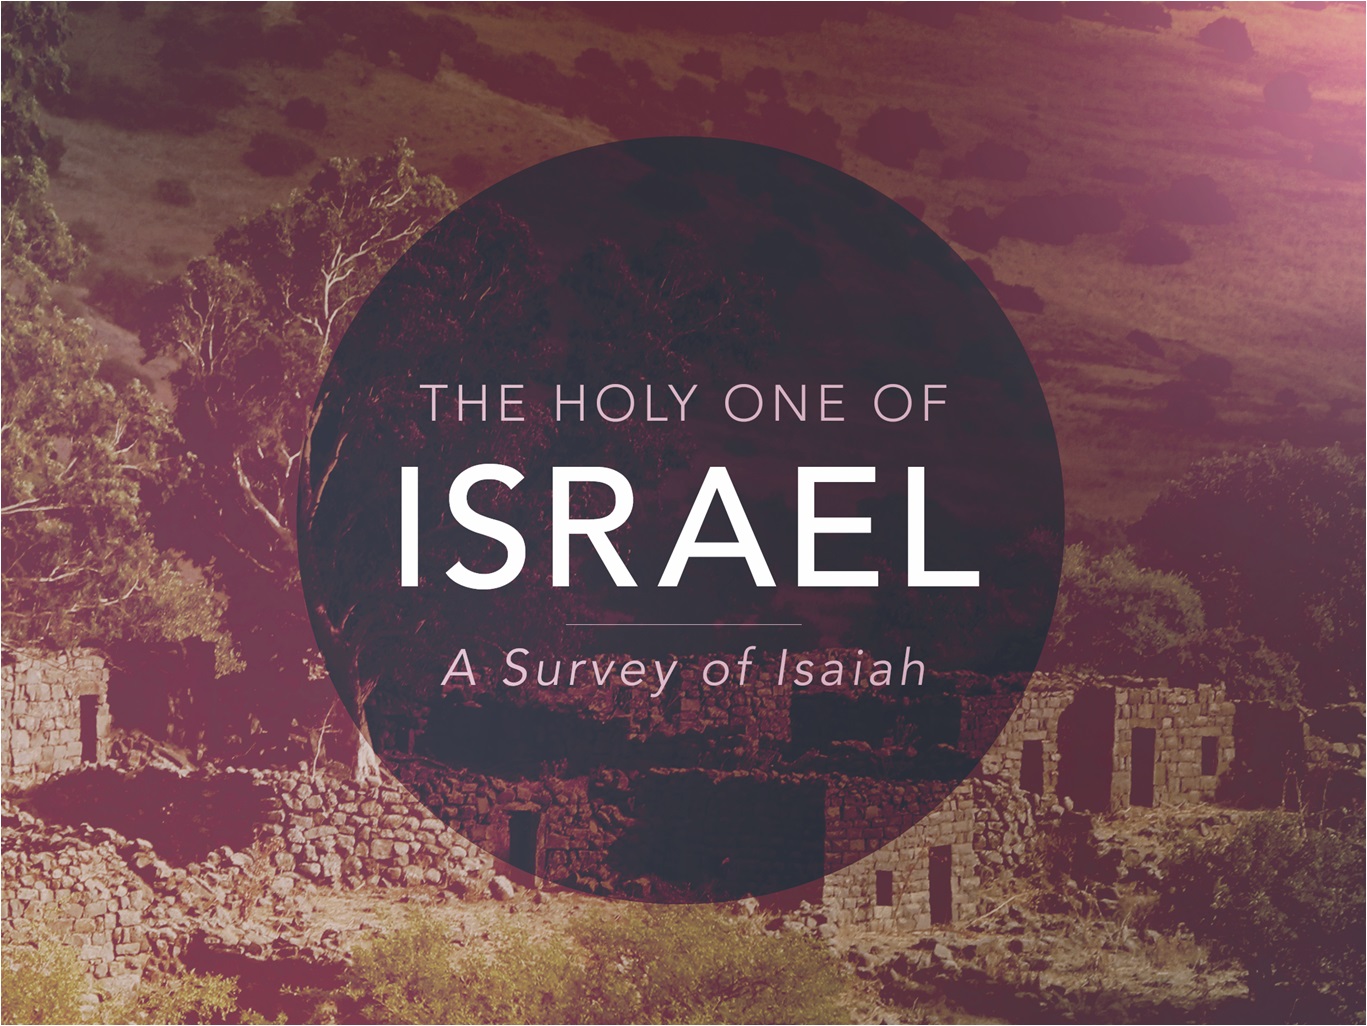 The Holy One of Israel: Faith in the coming Messiah